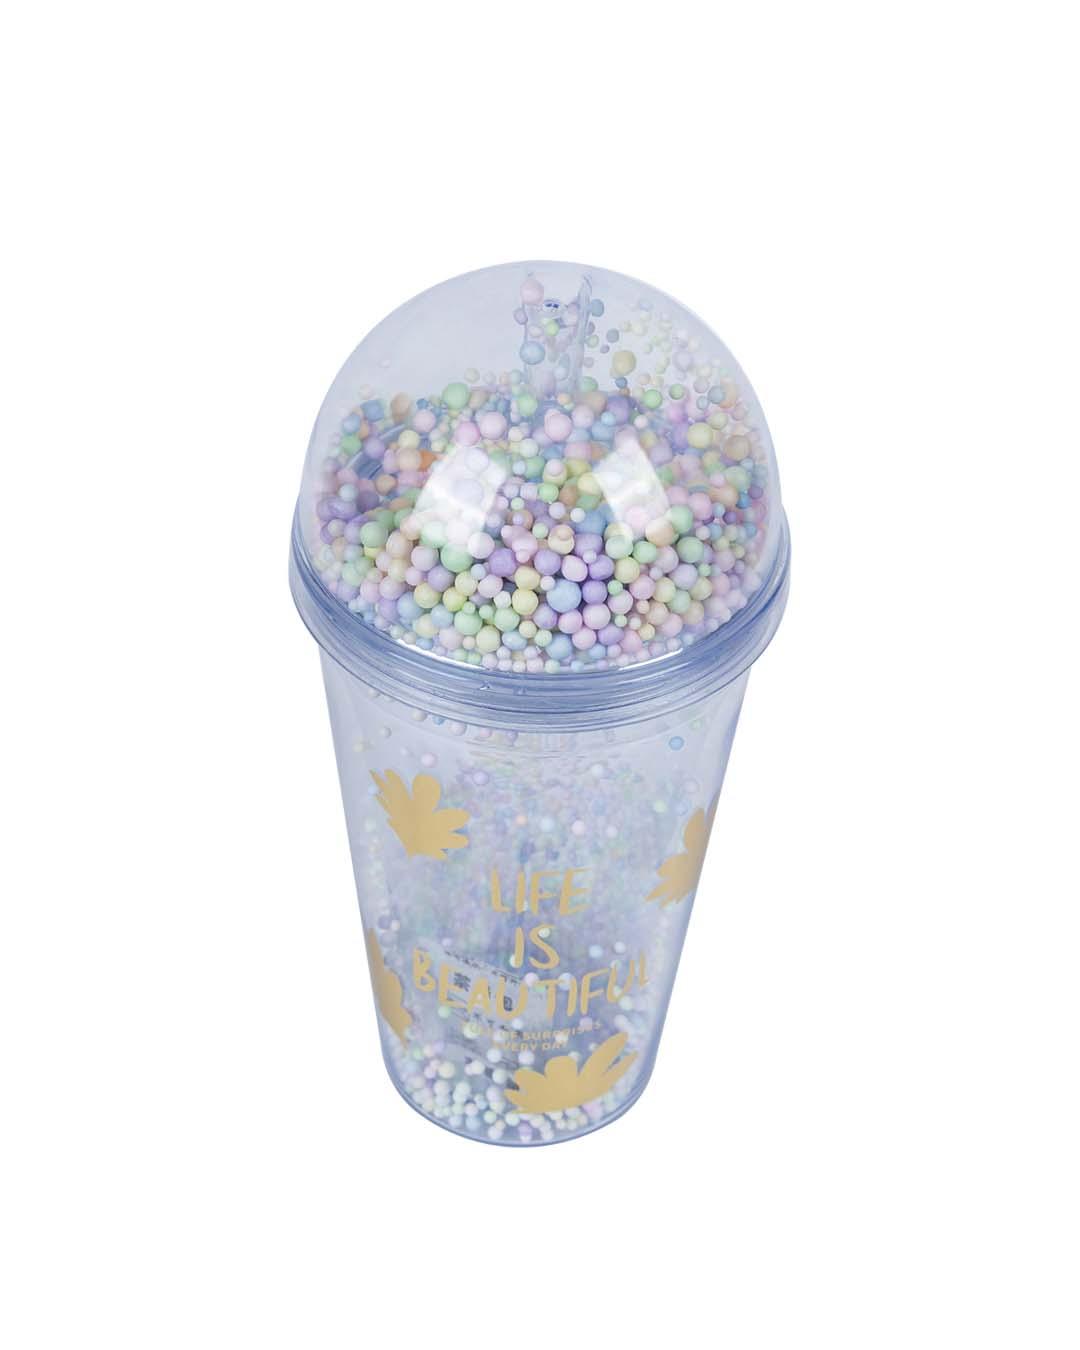 Polystyrene , Sipper With Straw  450 Ml, Colorfull Thermacol Balls, Glossy : Finish, Multicolor